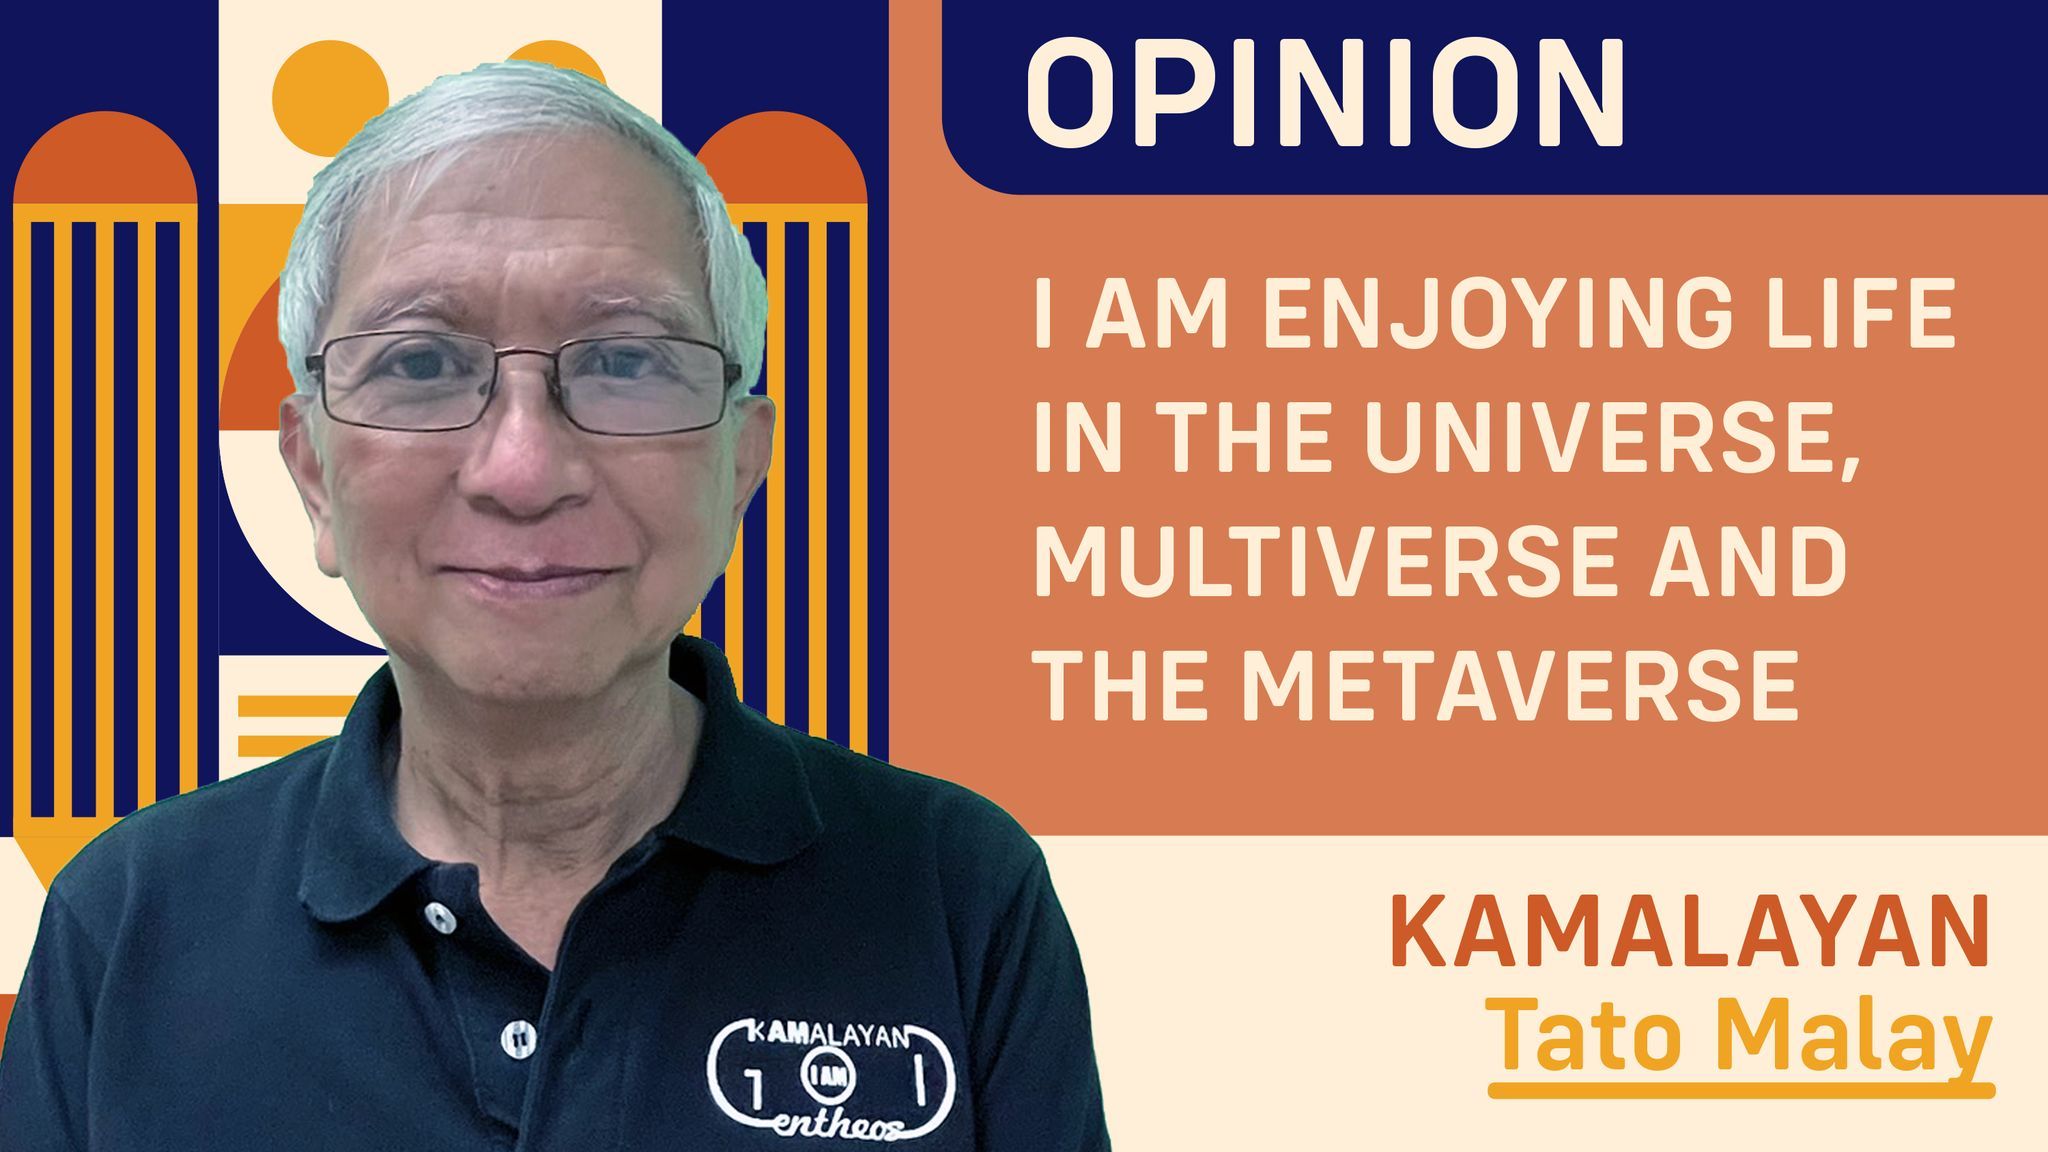 I AM ENJOYING LIFE IN THE UNIVERSE, MULTIVERSE AND THE METAVERSE